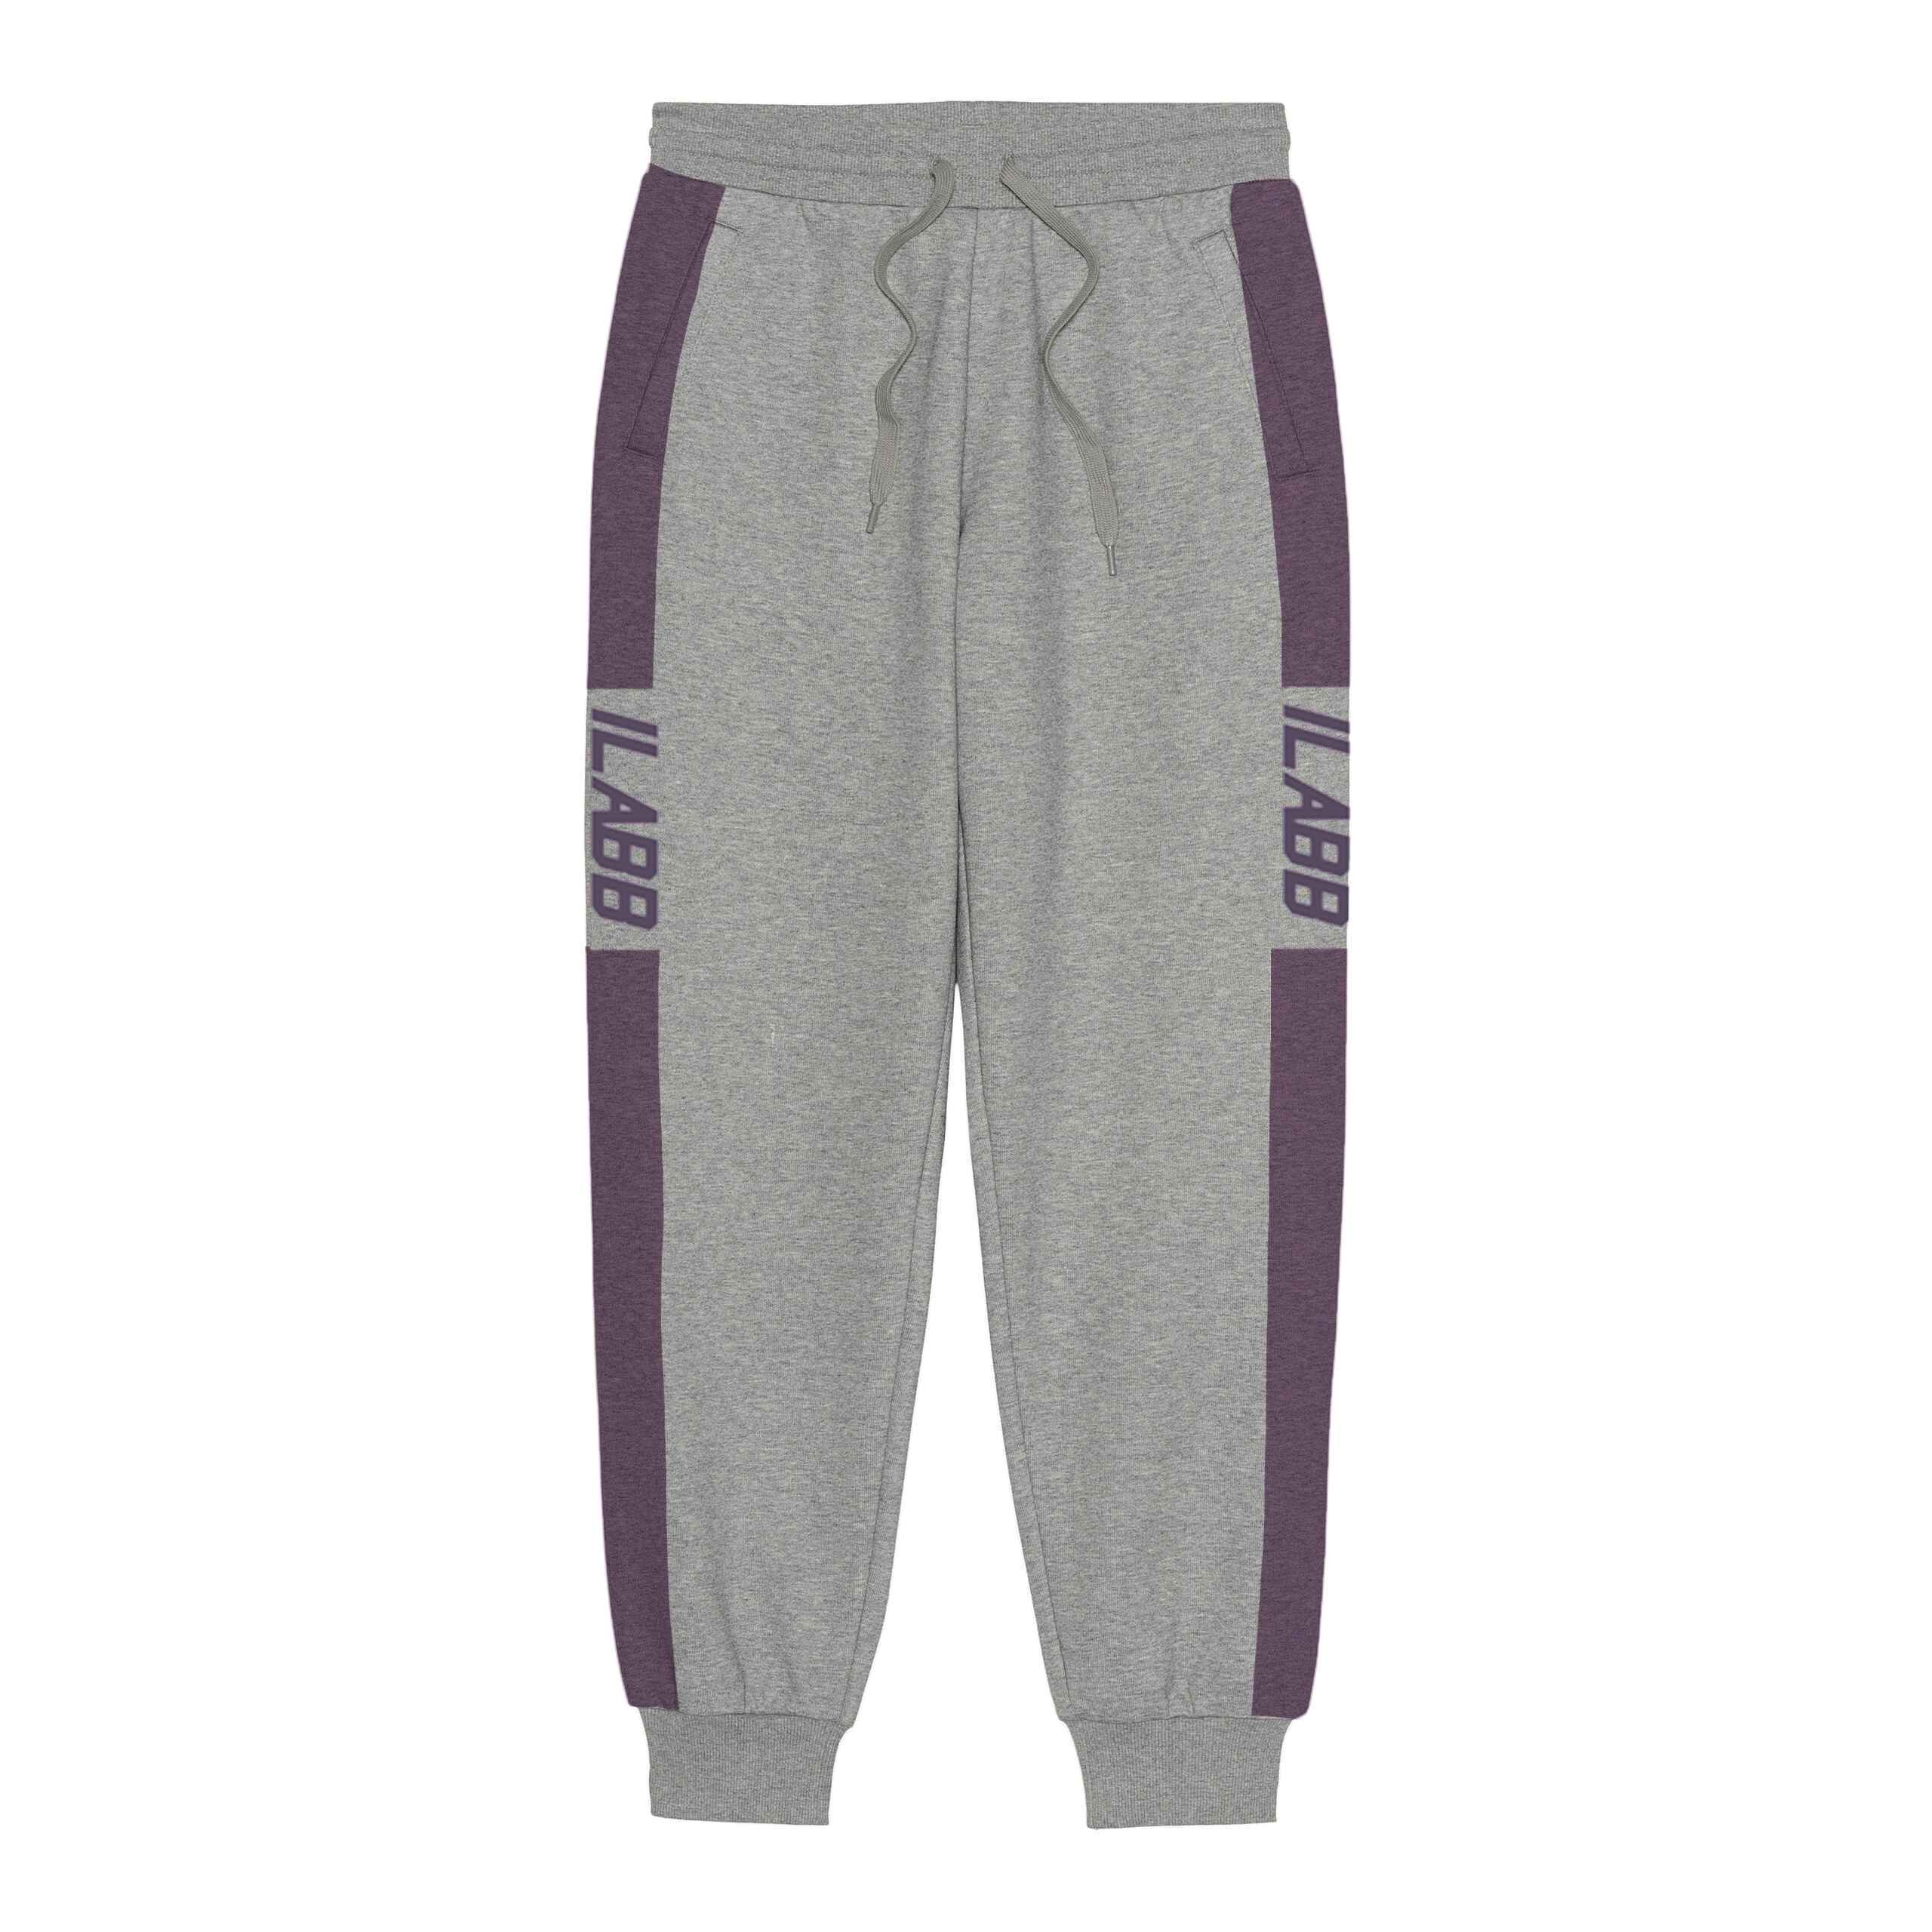 ILABB LADIES SPEED TRACKIE - GREY MARLE - Womens-Bottoms : Sequence ...